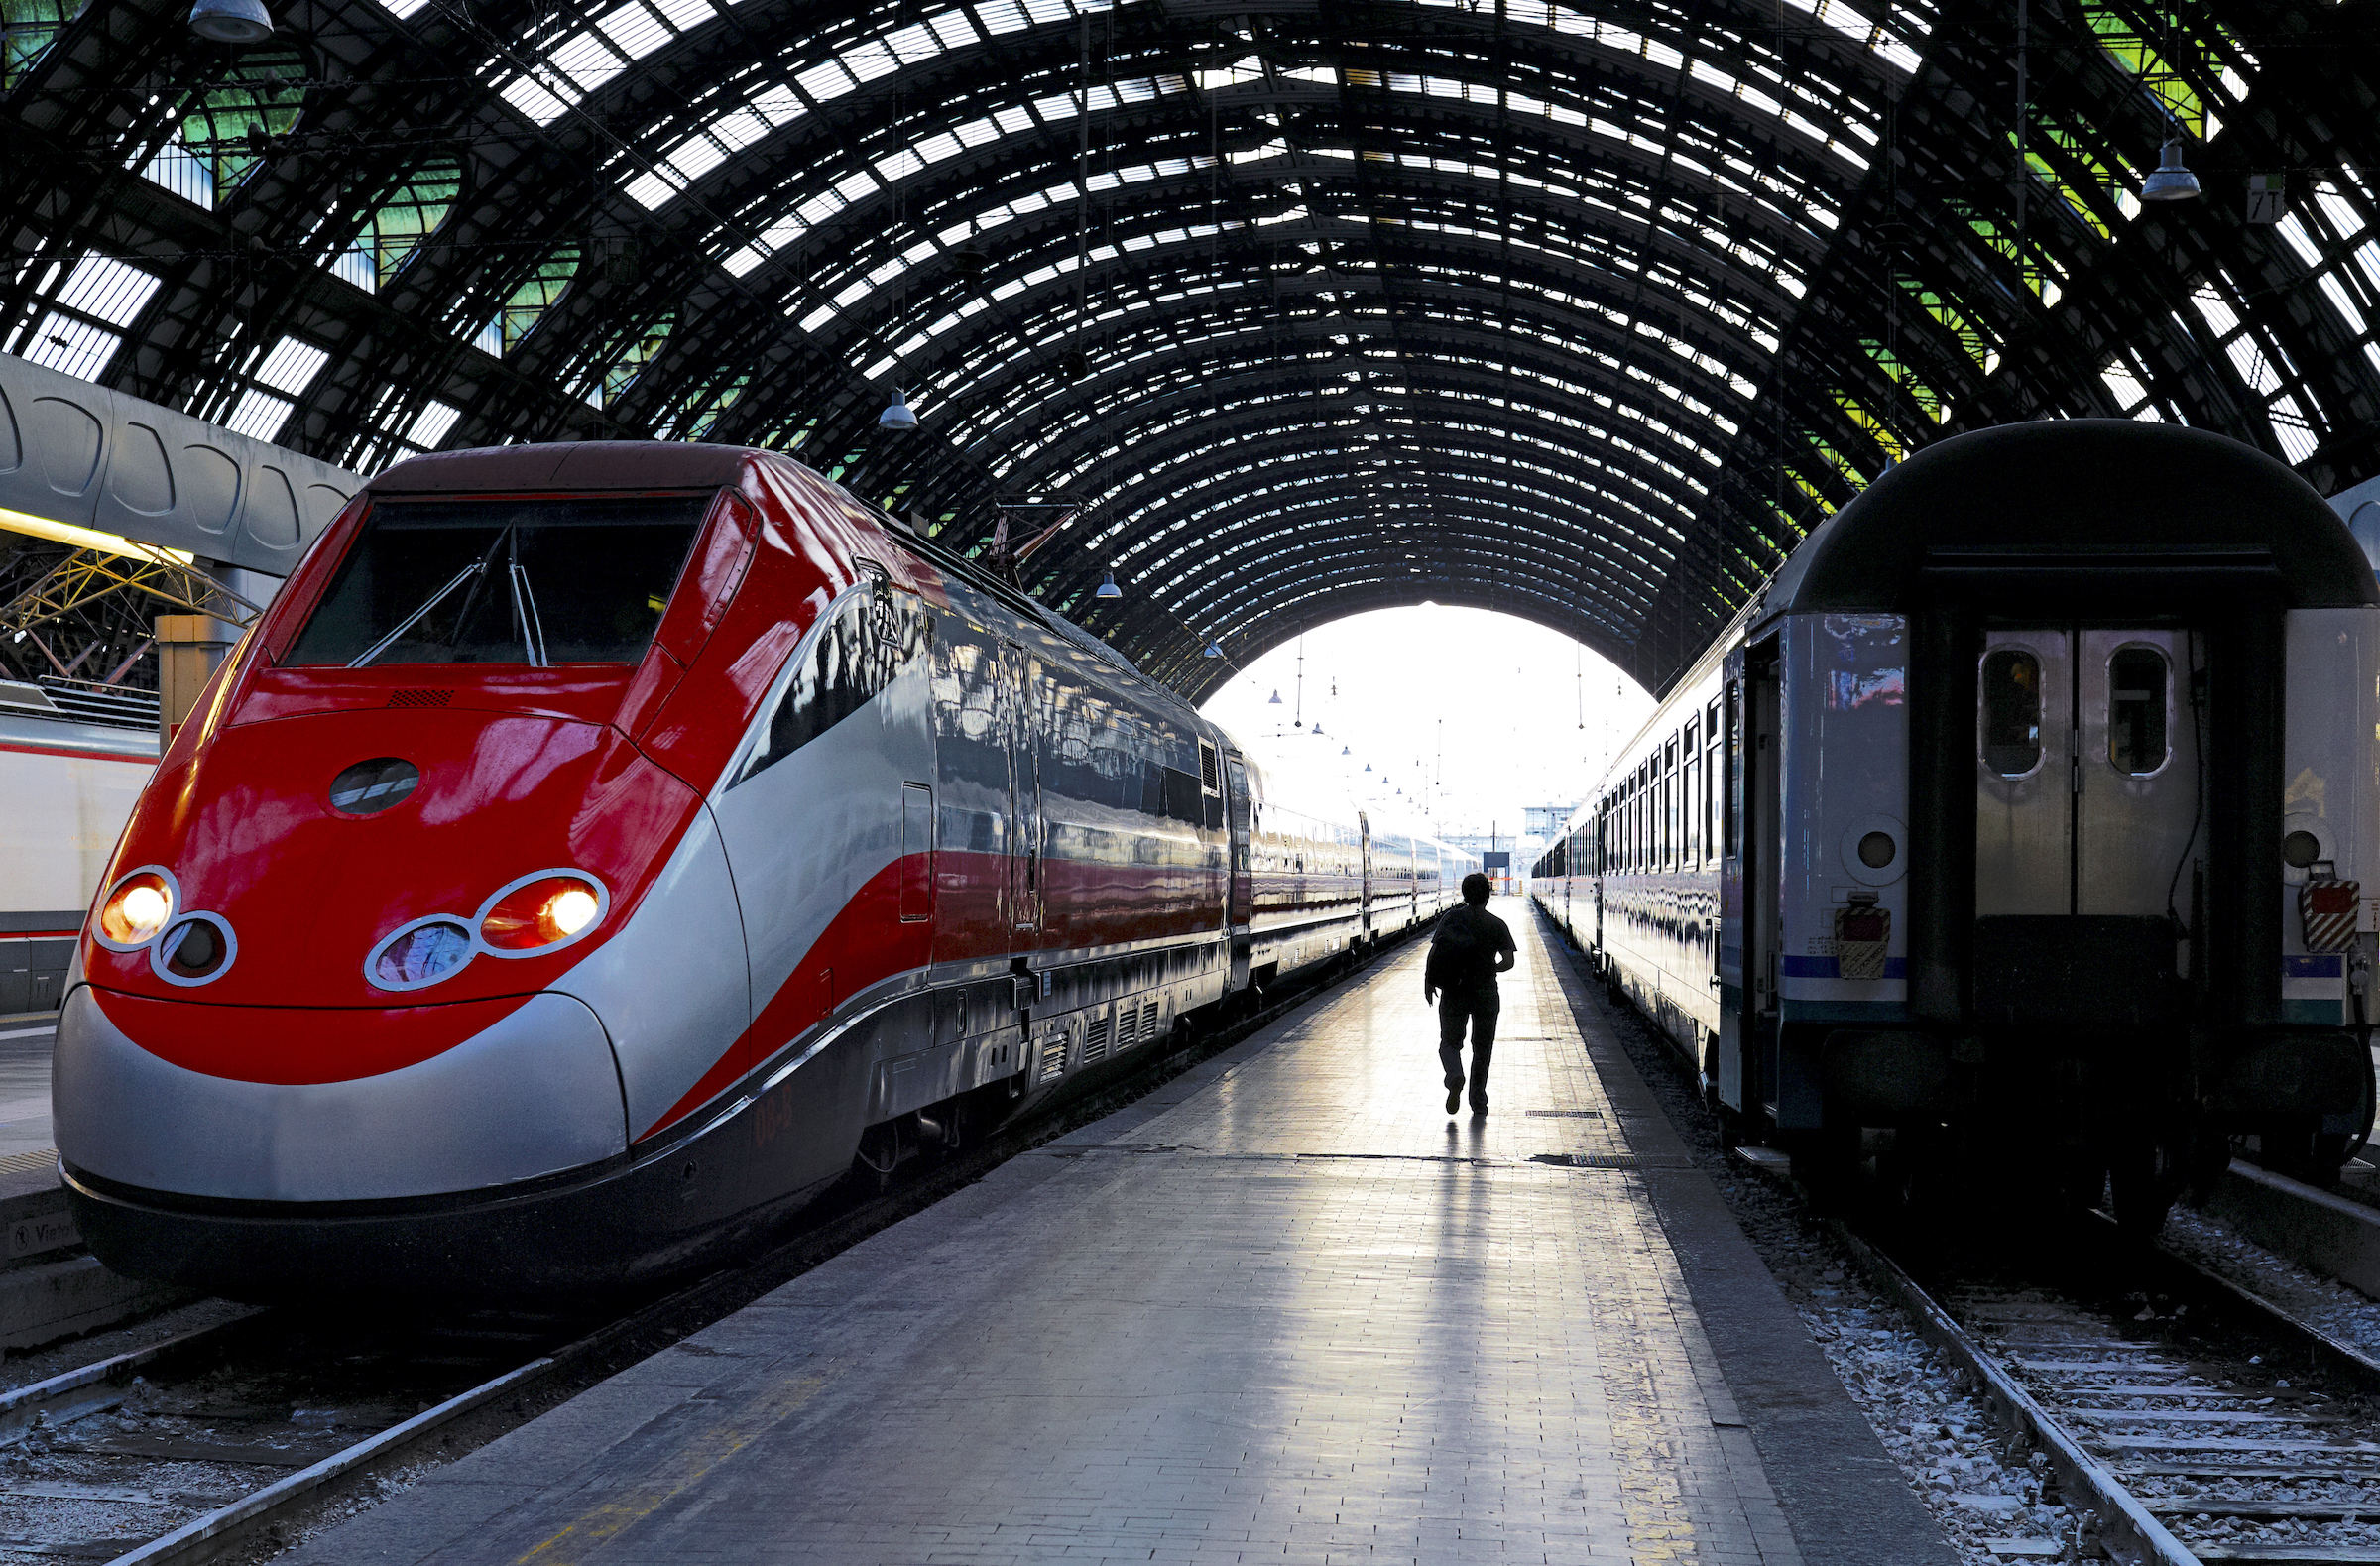 Italy's high-speed trains are equipped with rail-industry Ethernet 